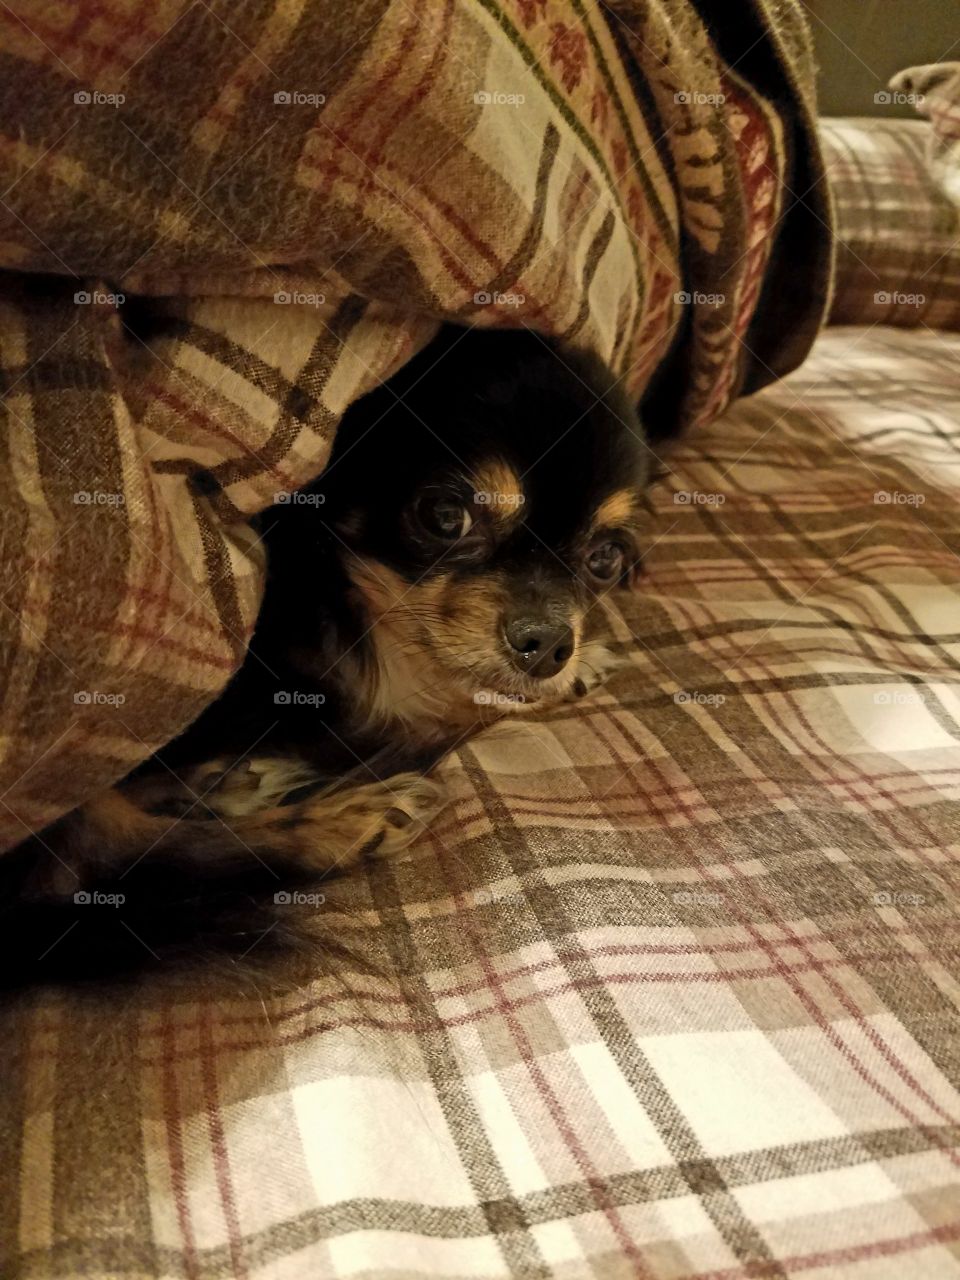 Look who's hiding under the covers!